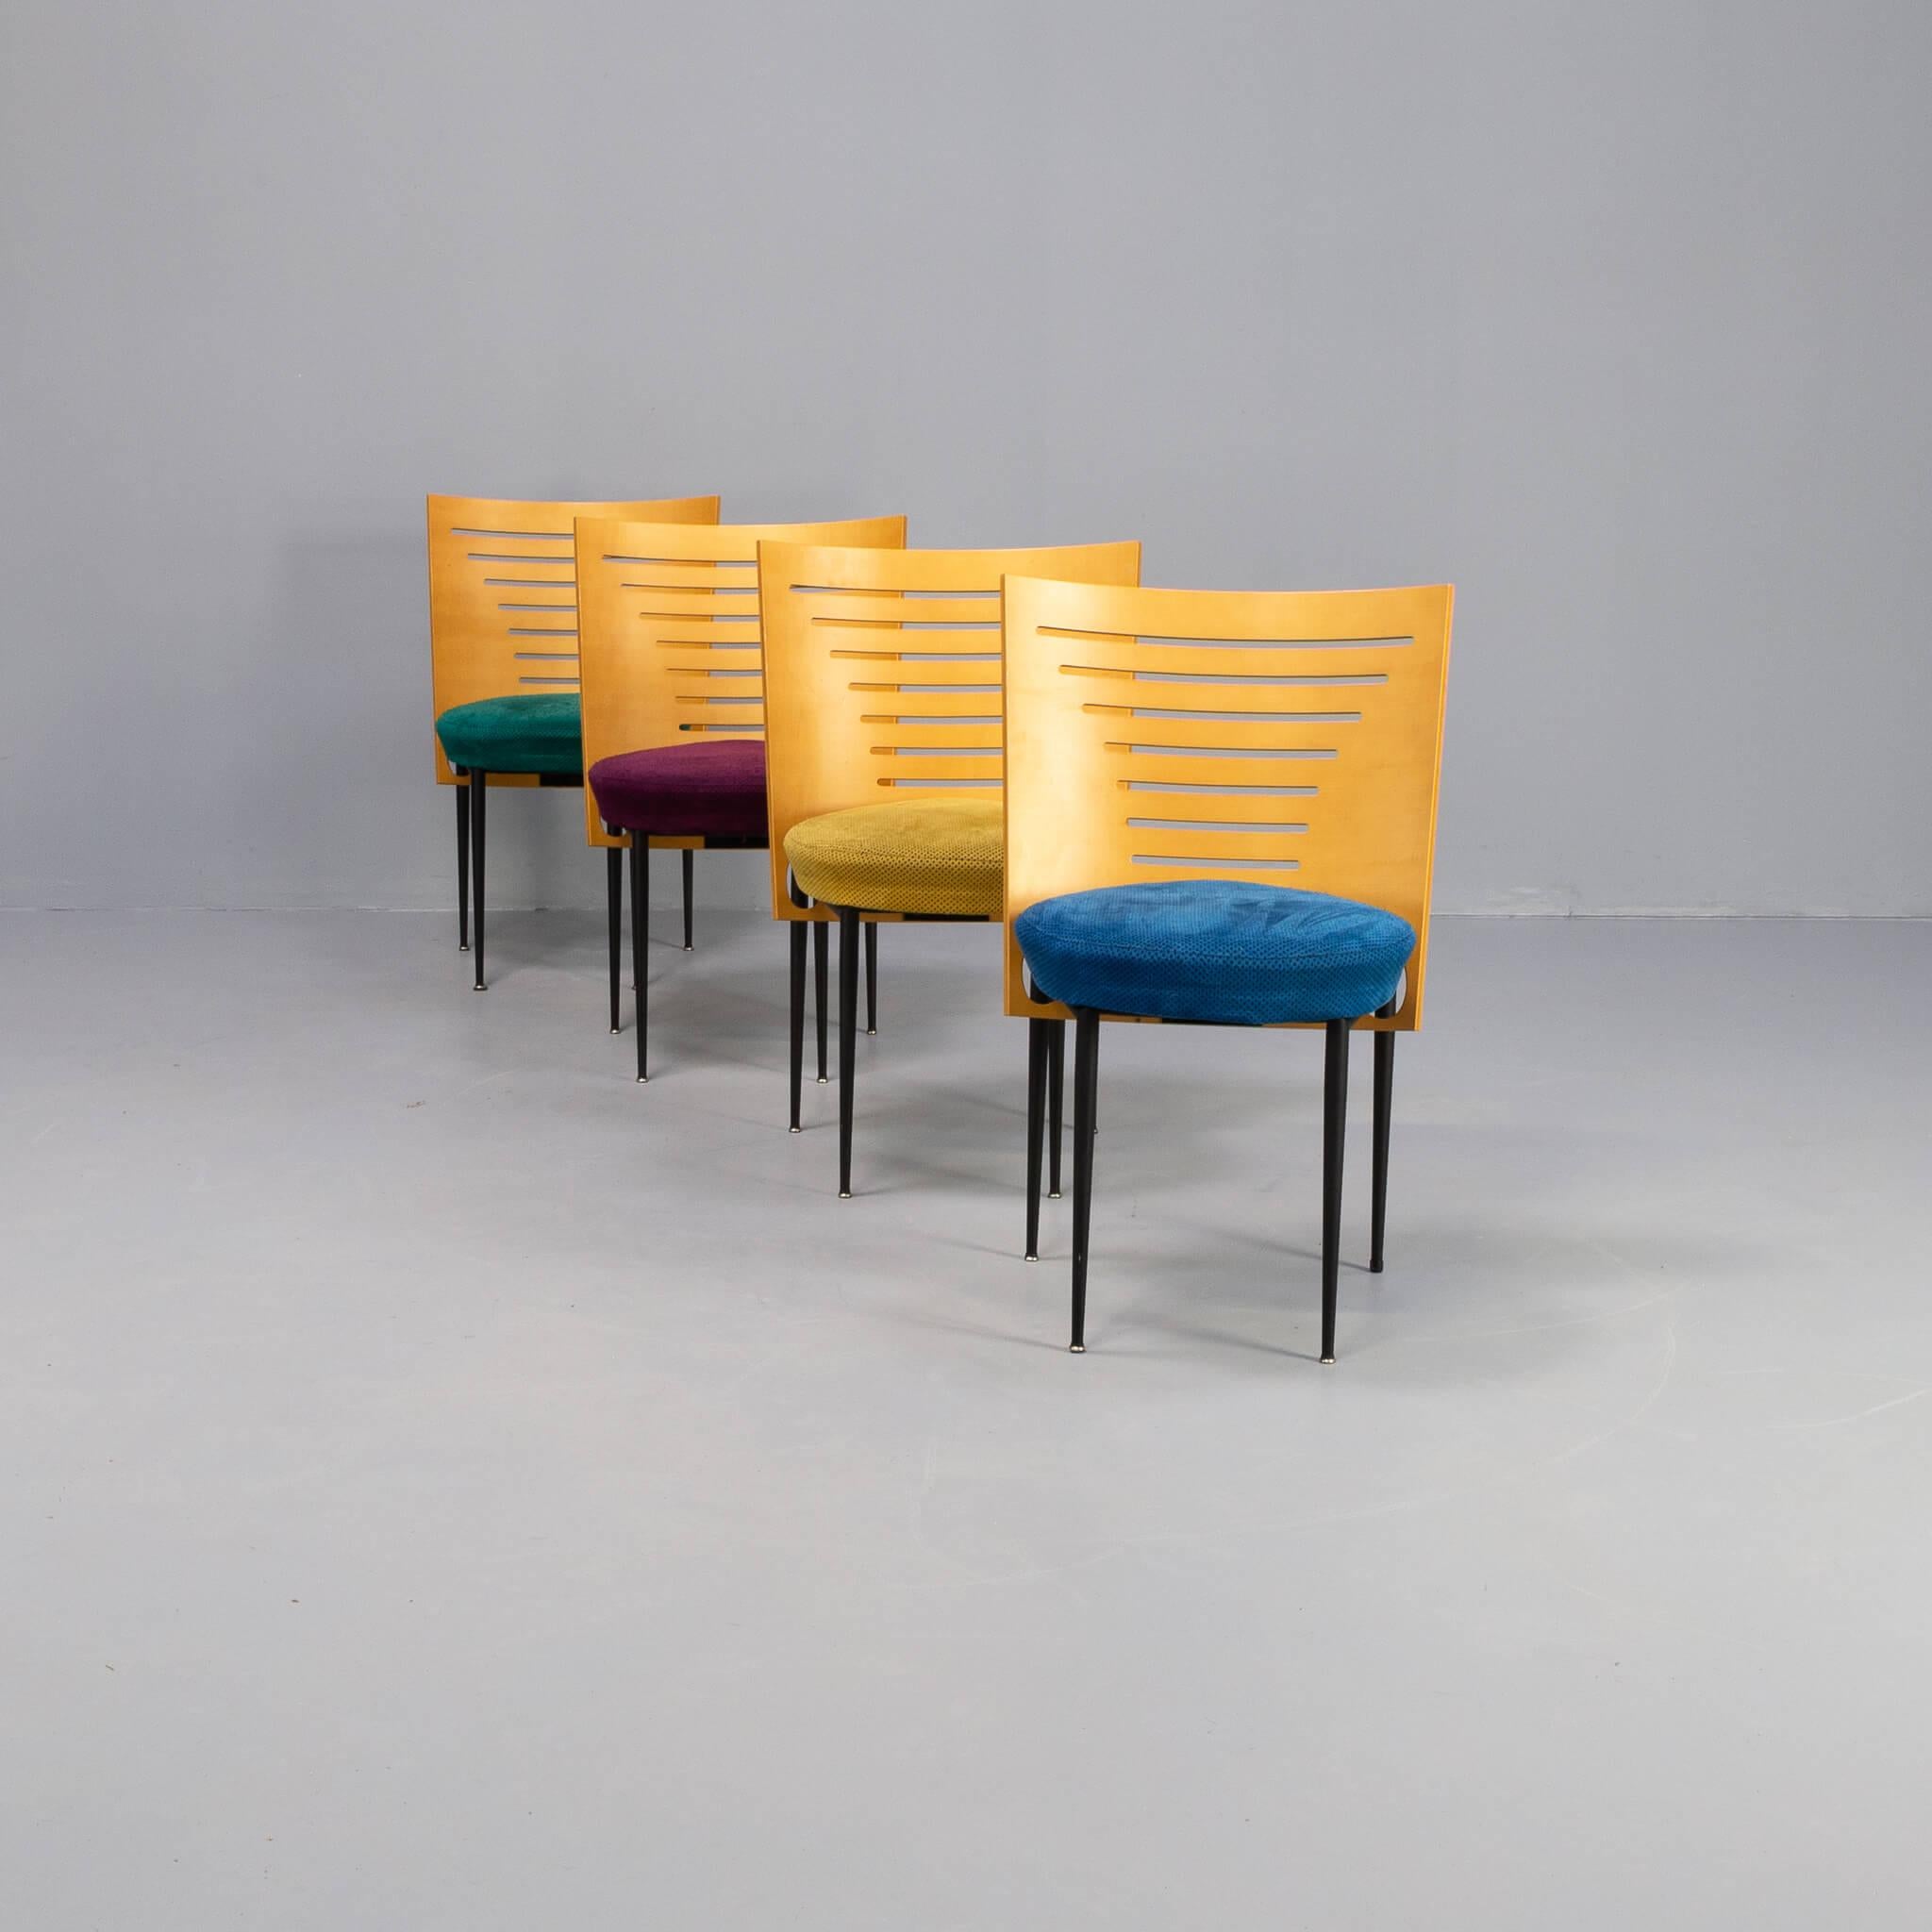 Rare postmodern dining chair in Memphis style designed by the famous Dutch designer duo Pierre Mazairac and Karel Boonzaadjer for Castelijn. The harmonica chairs, as they are called, are comfortable and very linear. Chairs are in good condition